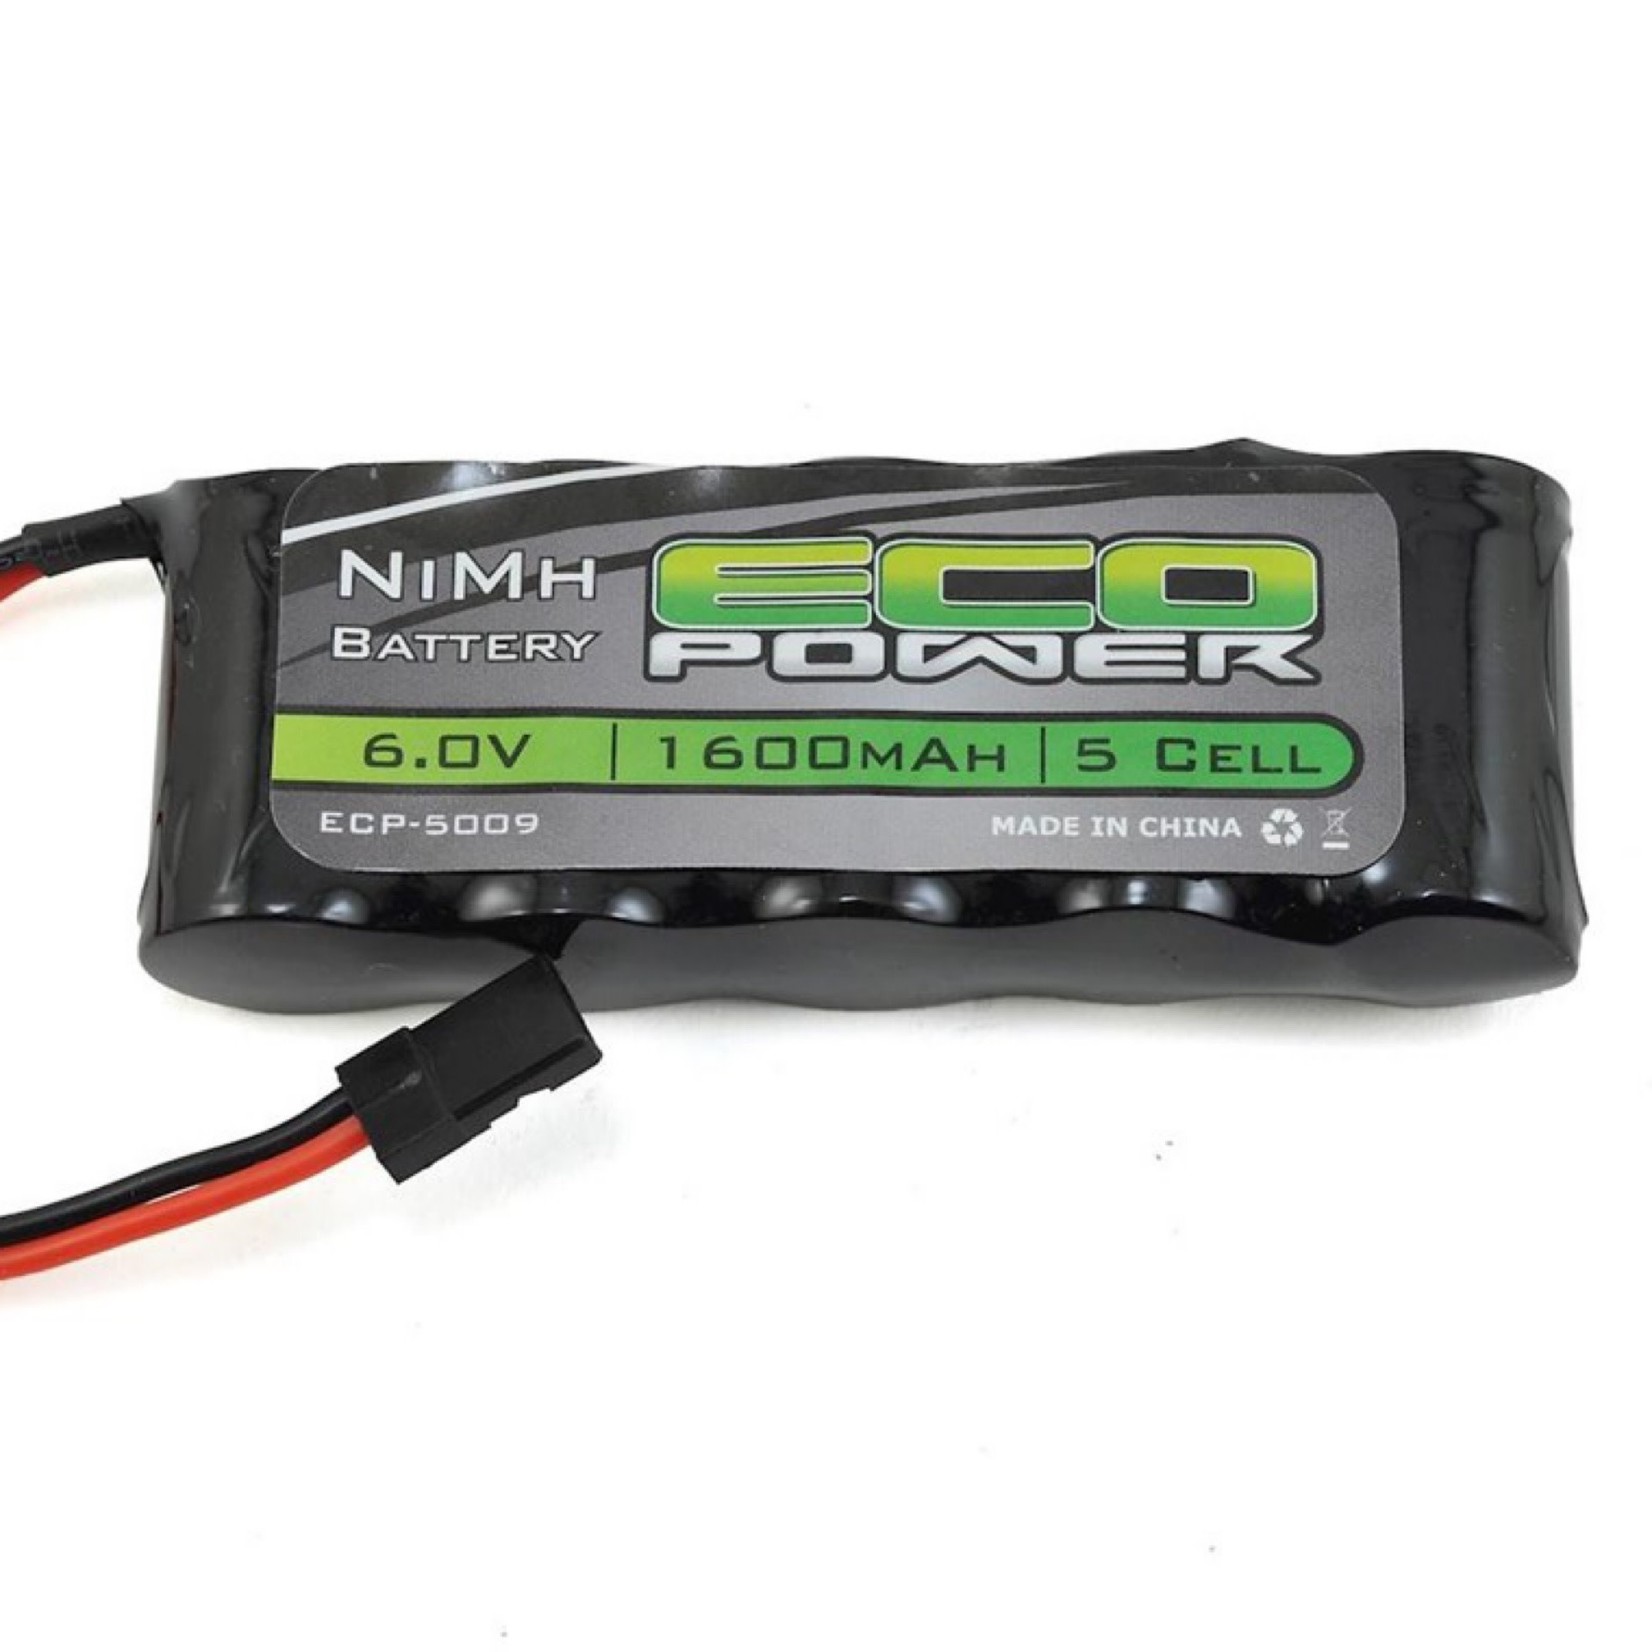 EcoPower EcoPower 5-Cell NiMH Stick Receiver Battery Pack (6.0V/1600mAh) #ECP-5009